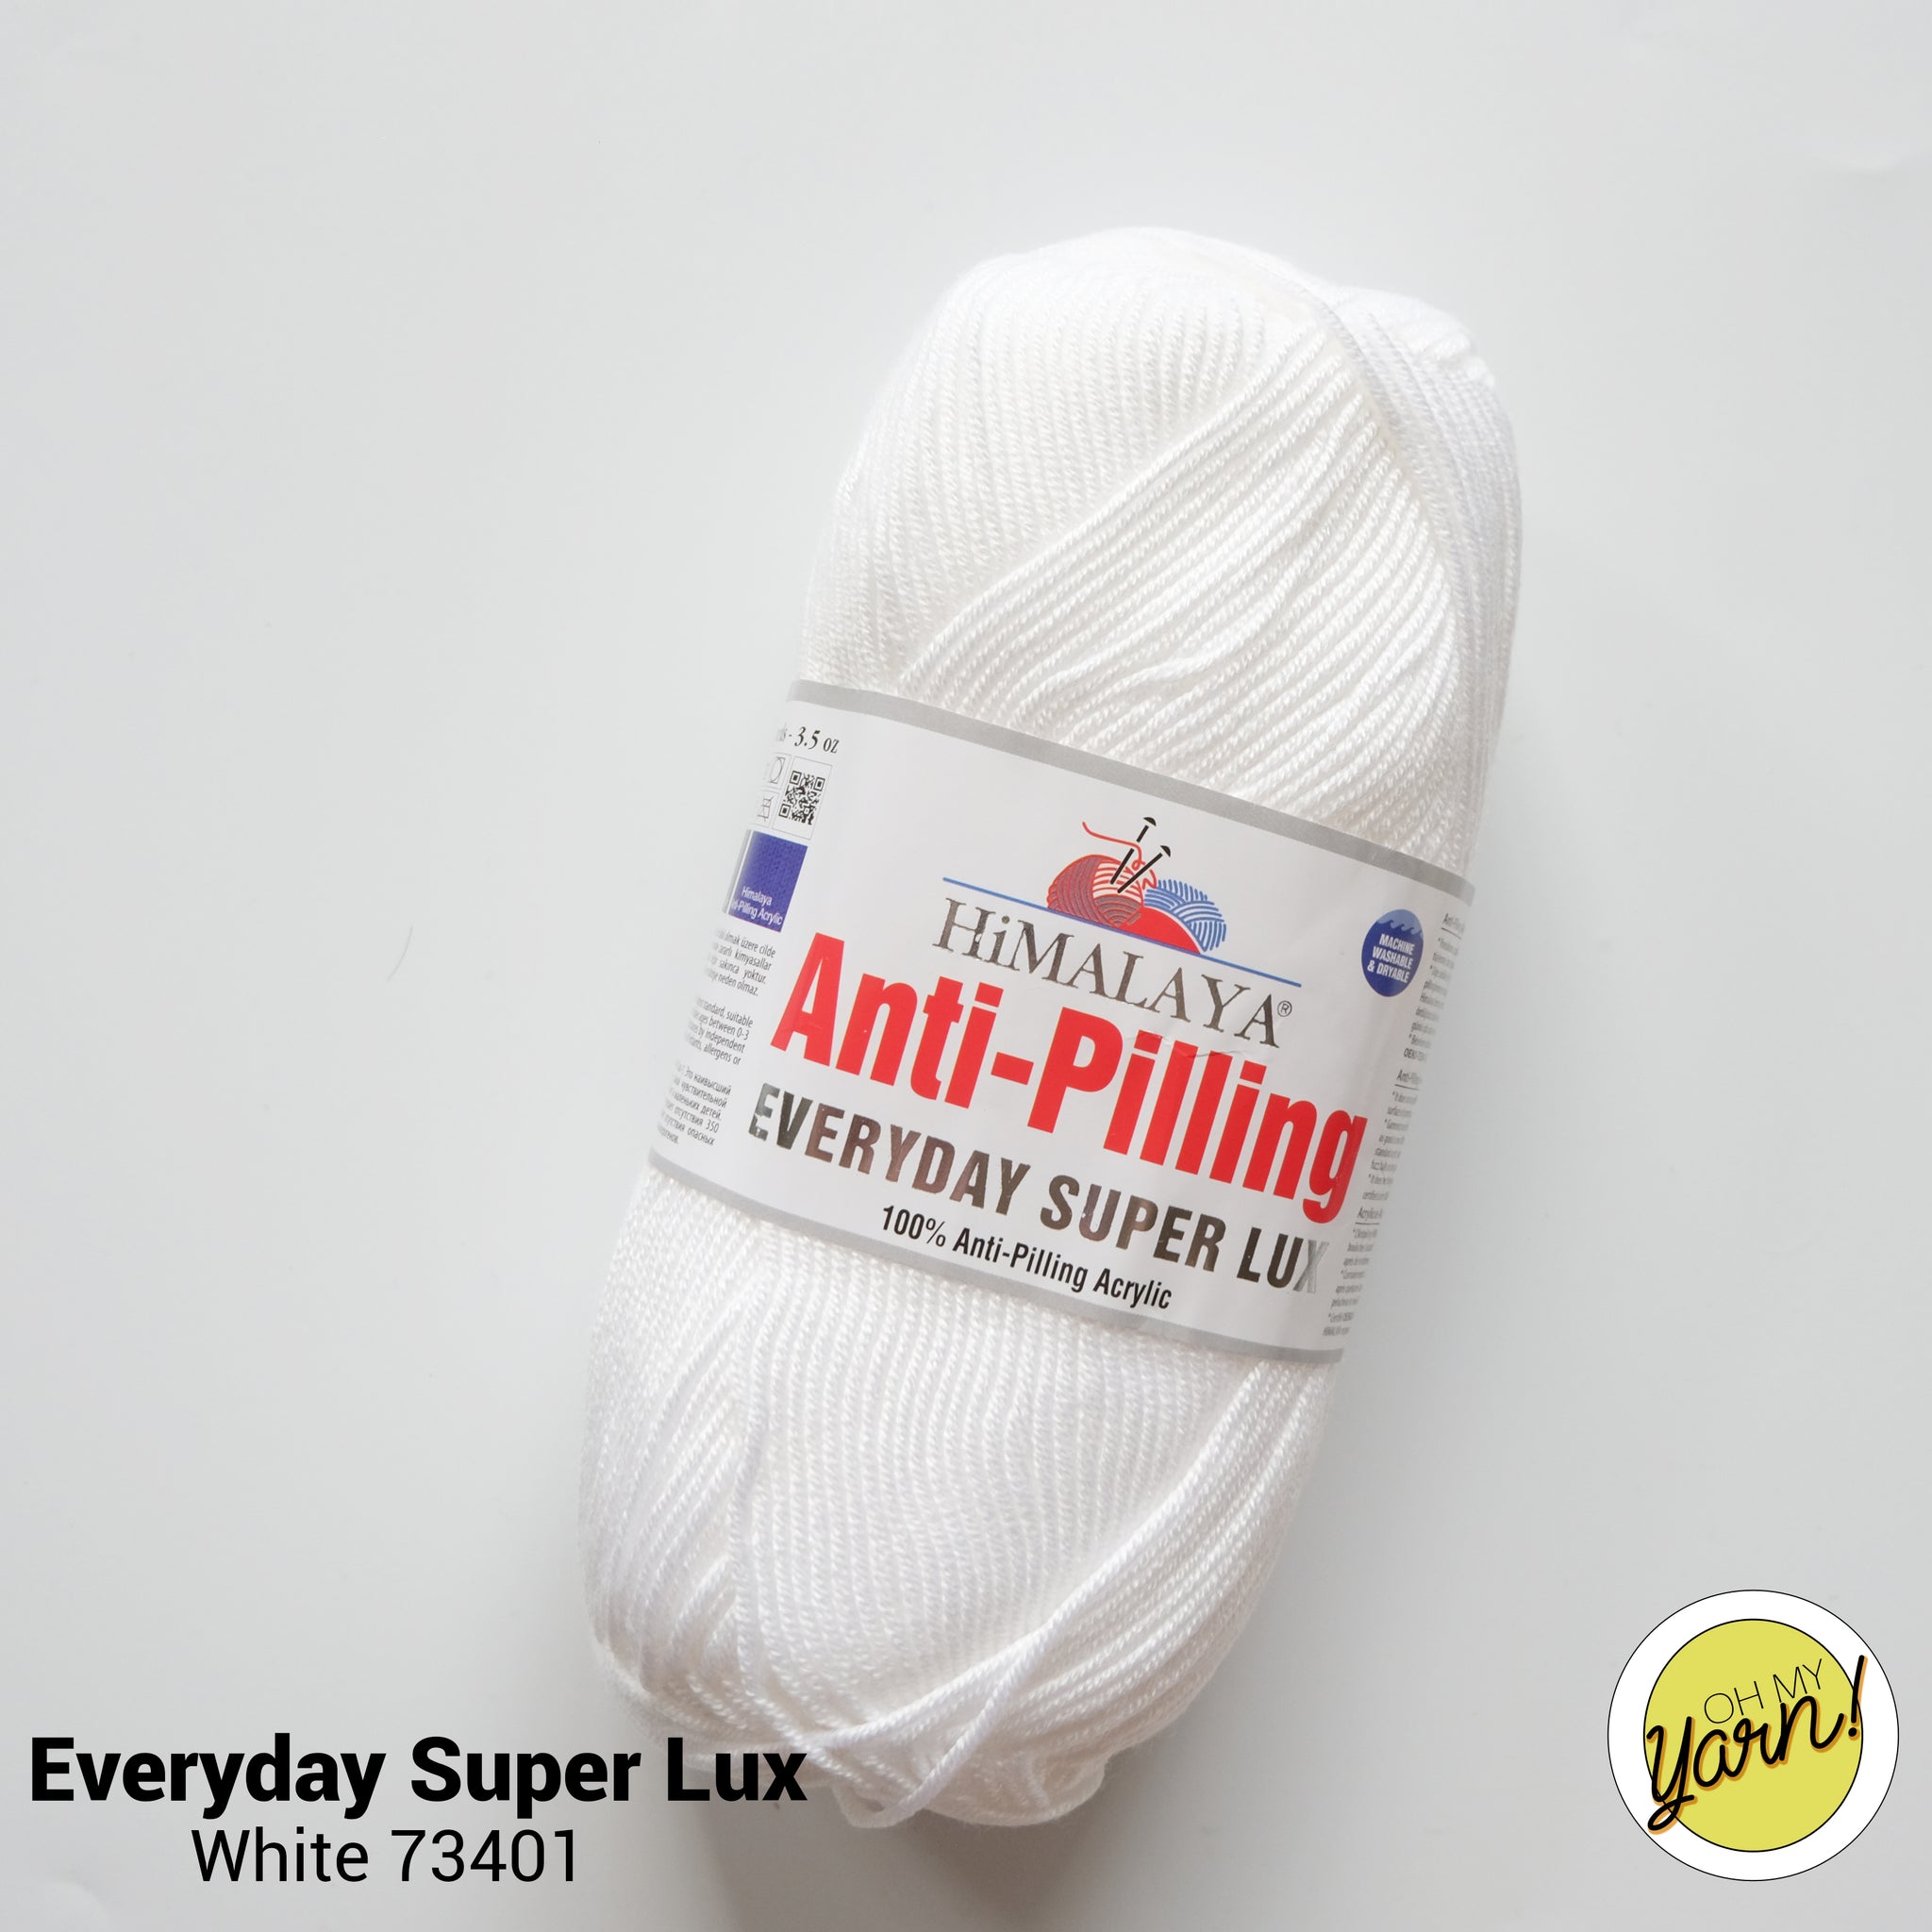 Himalaya Everyday Super Lux 100g Anti Pilling Yarn for Hand